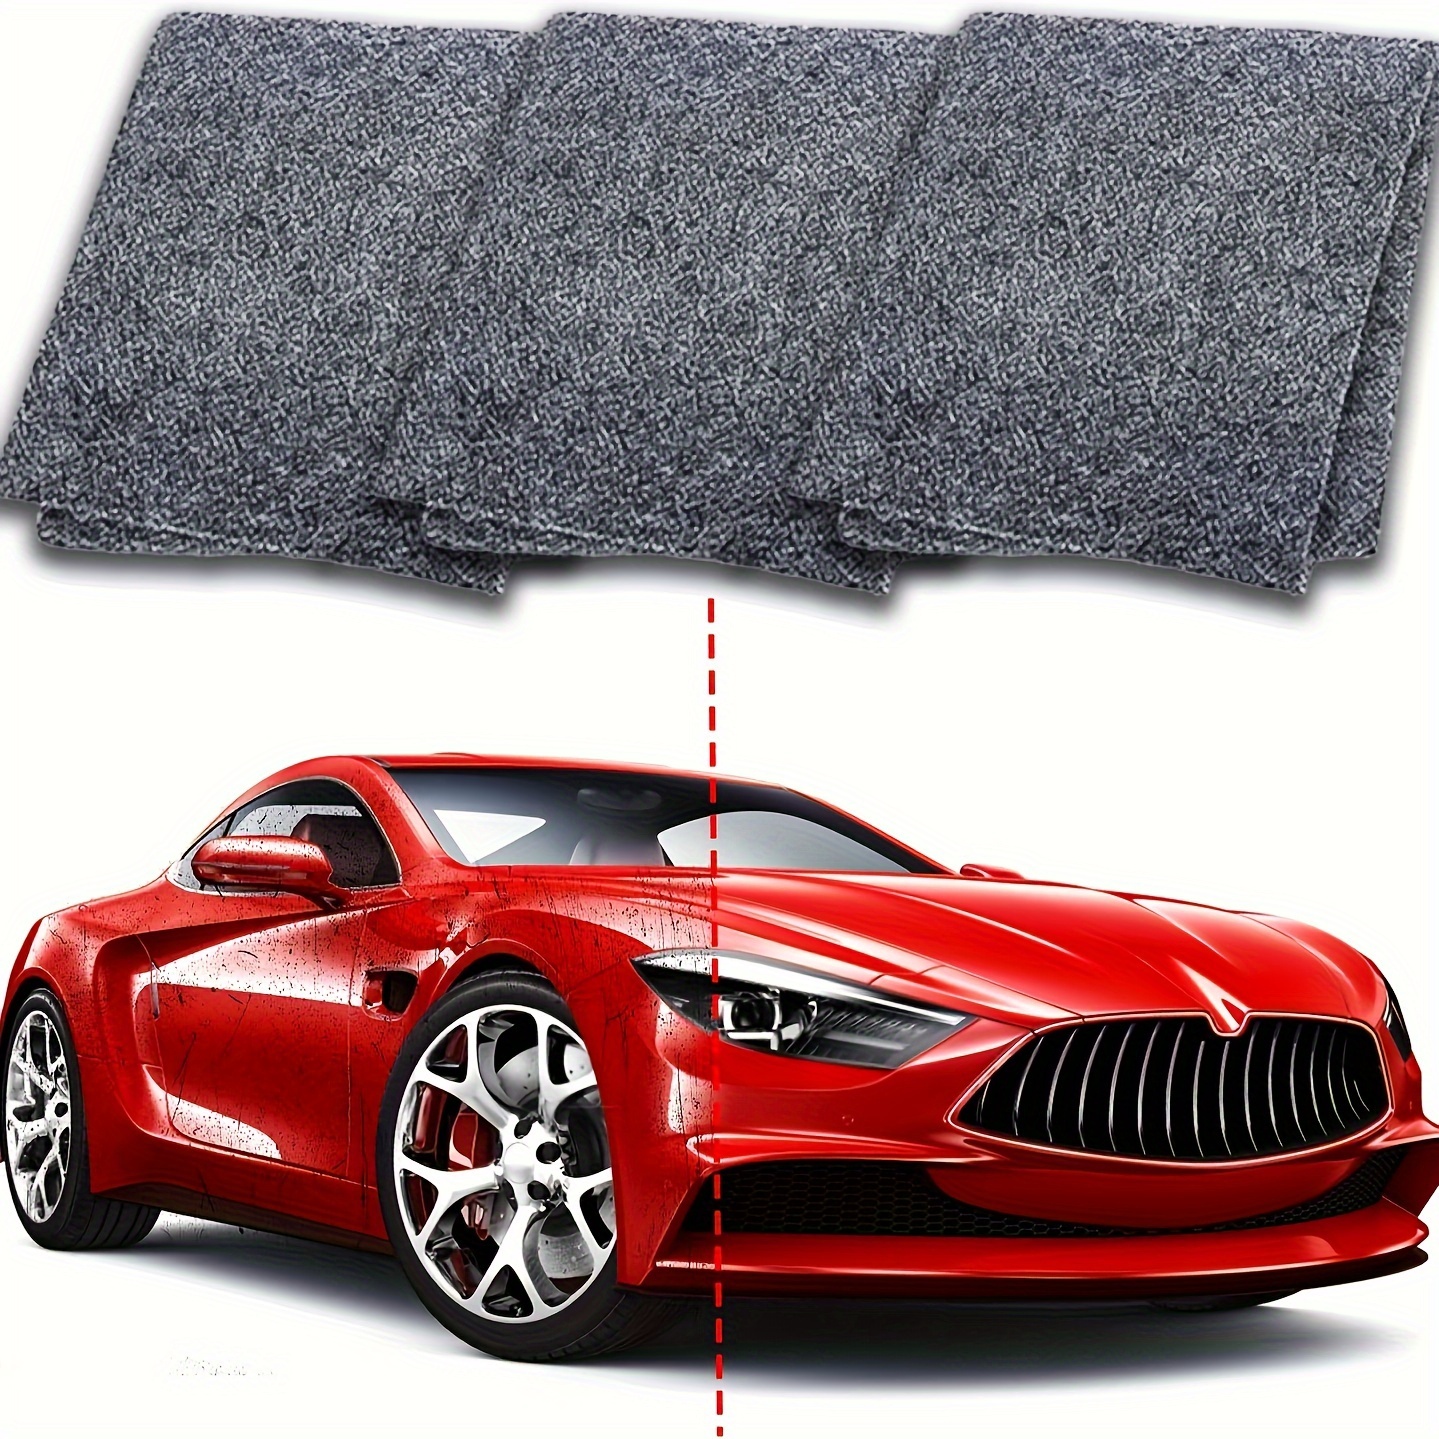 

Nano Sparkle - Nano Sparkle Cloth Car Scratch Remover, Nano Cloth, Sparkle Cloth, Nanosparkle Cloth For Car Scratches, Shine Cloths For Car Scratches, With Scratch Repair And Polishing Function